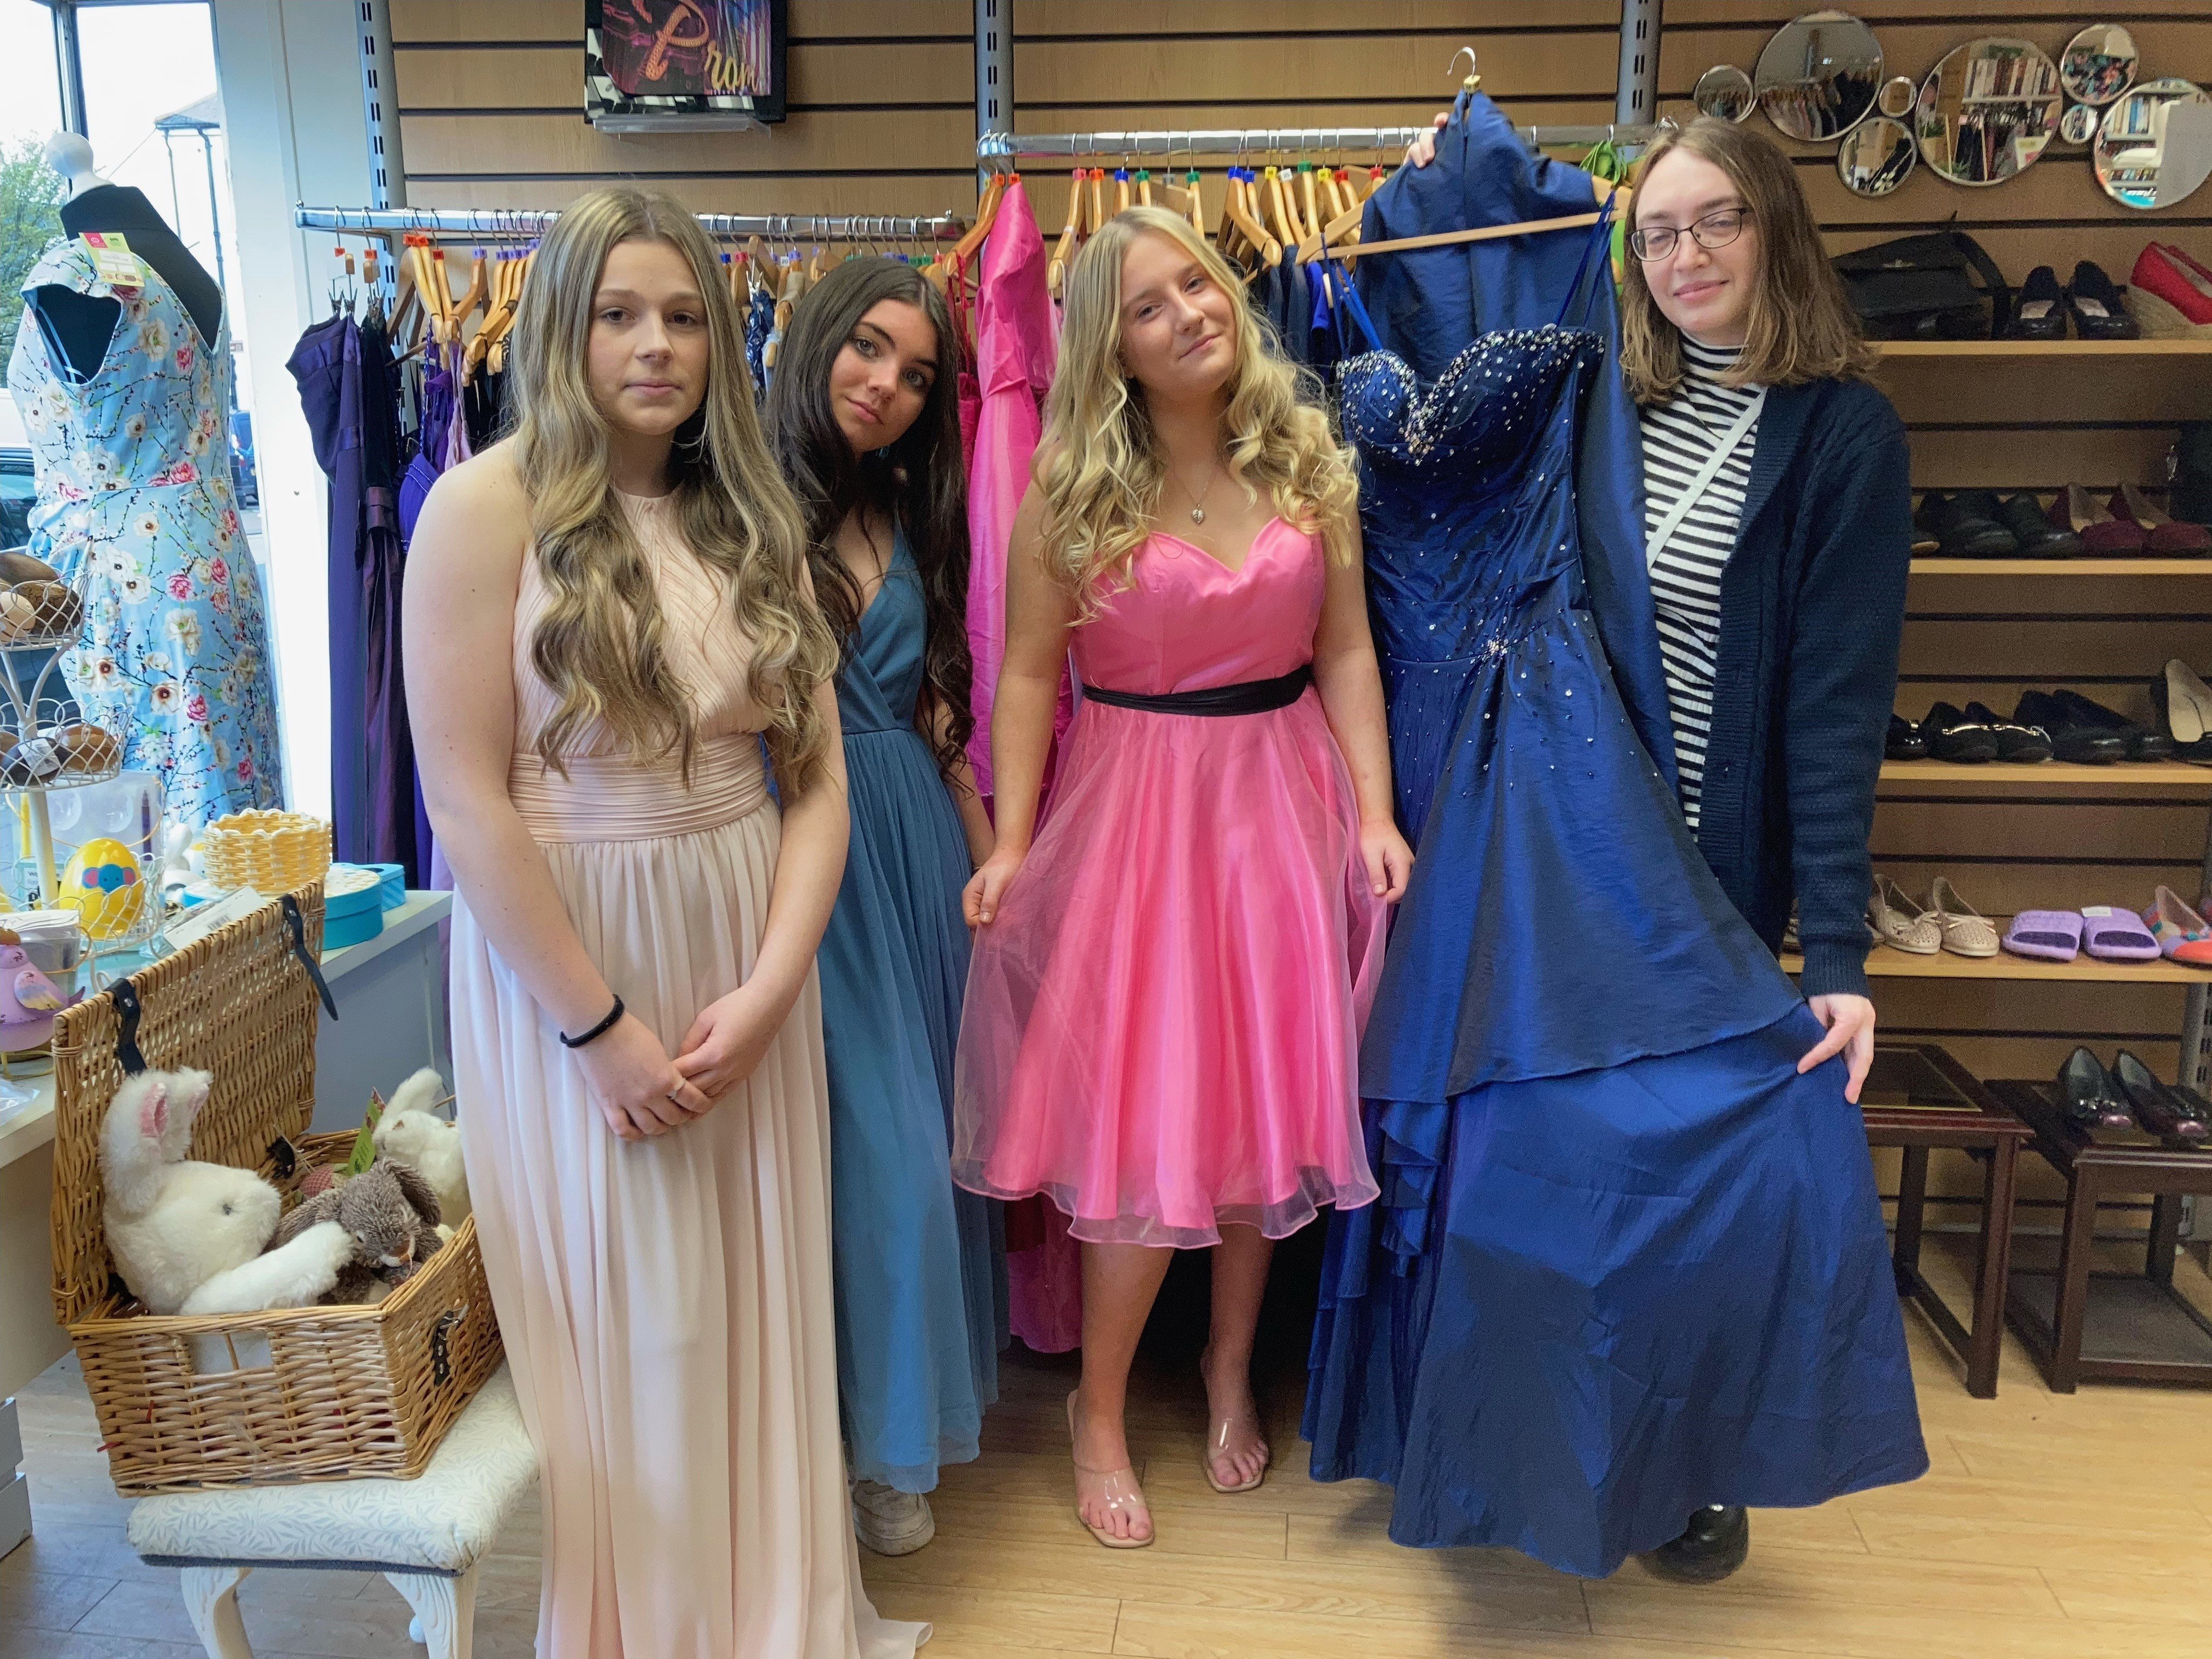 Honiton Community College students Ella-Mae Salter, Lian Galloen and Tia Rush try on some of the dresses with shop volunteer Emma Weir